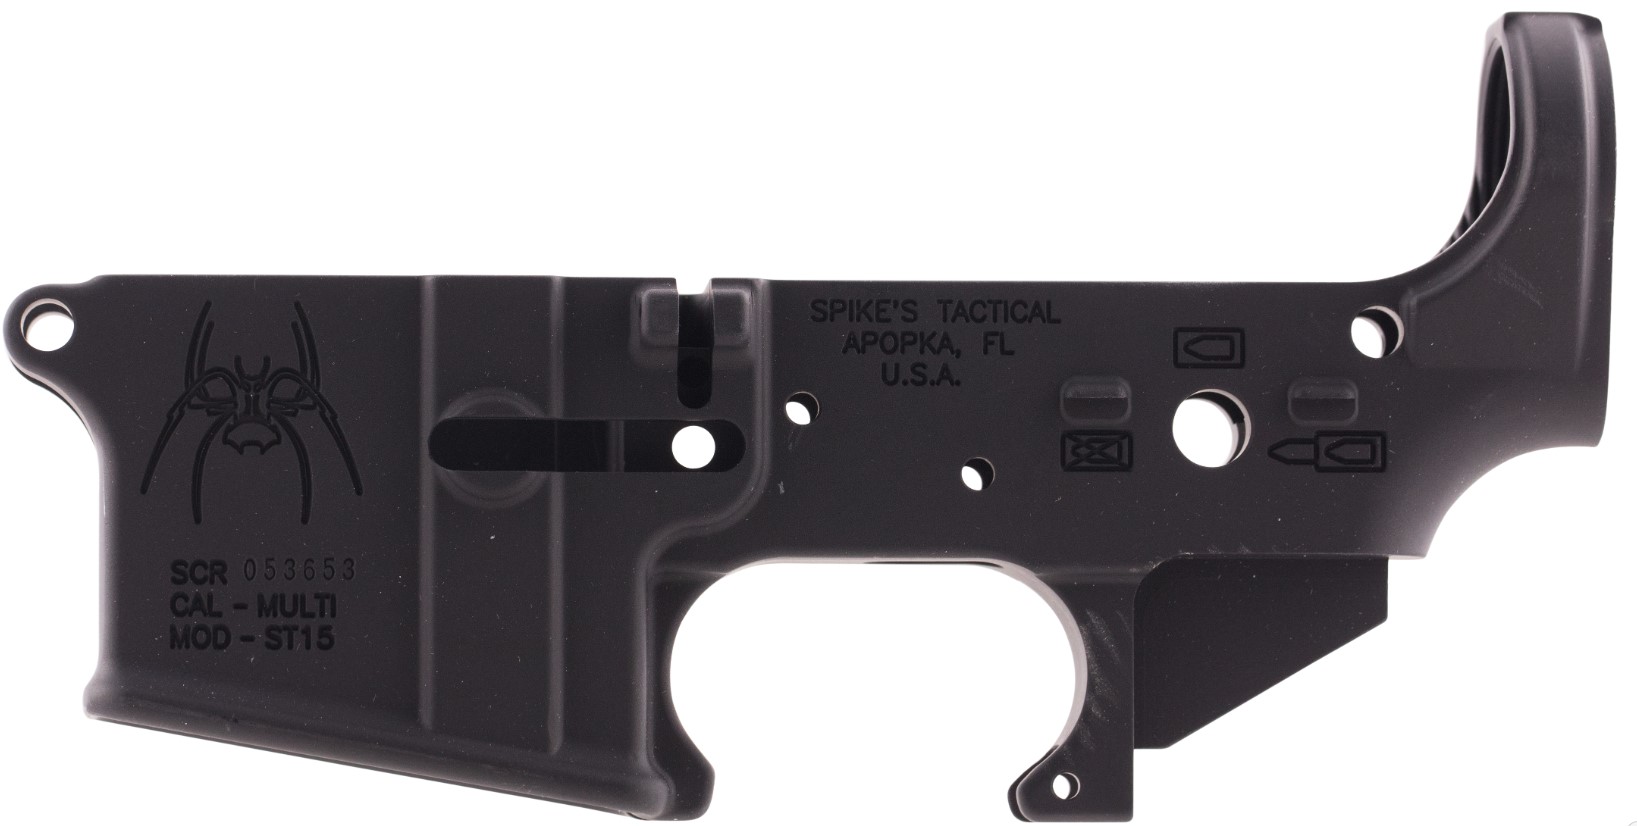 Spikes STLS019 Spider Stripped Lower Receiver with Billet Markings Multi-Caliber 7075-T6 Aluminum Black Anodized for AR-15